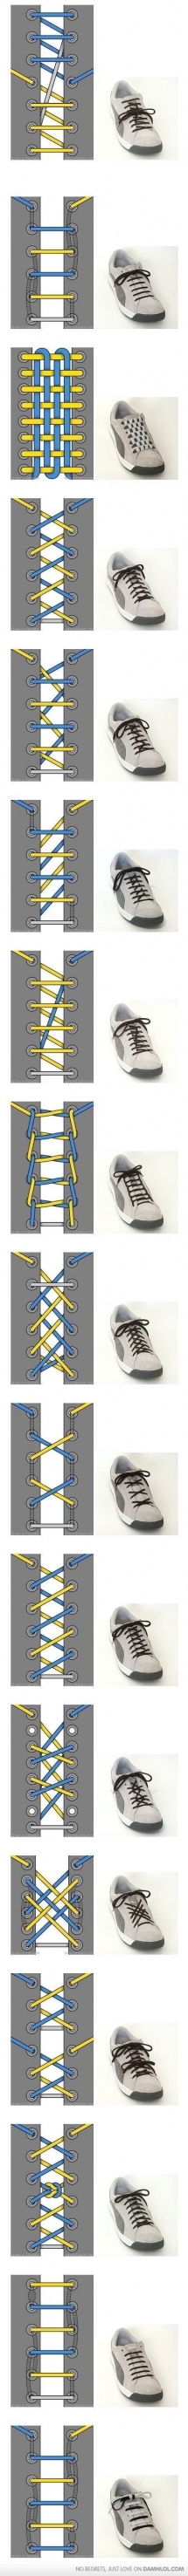 36 Cool Ways To Tie Your Shoe Laces - How to tie things